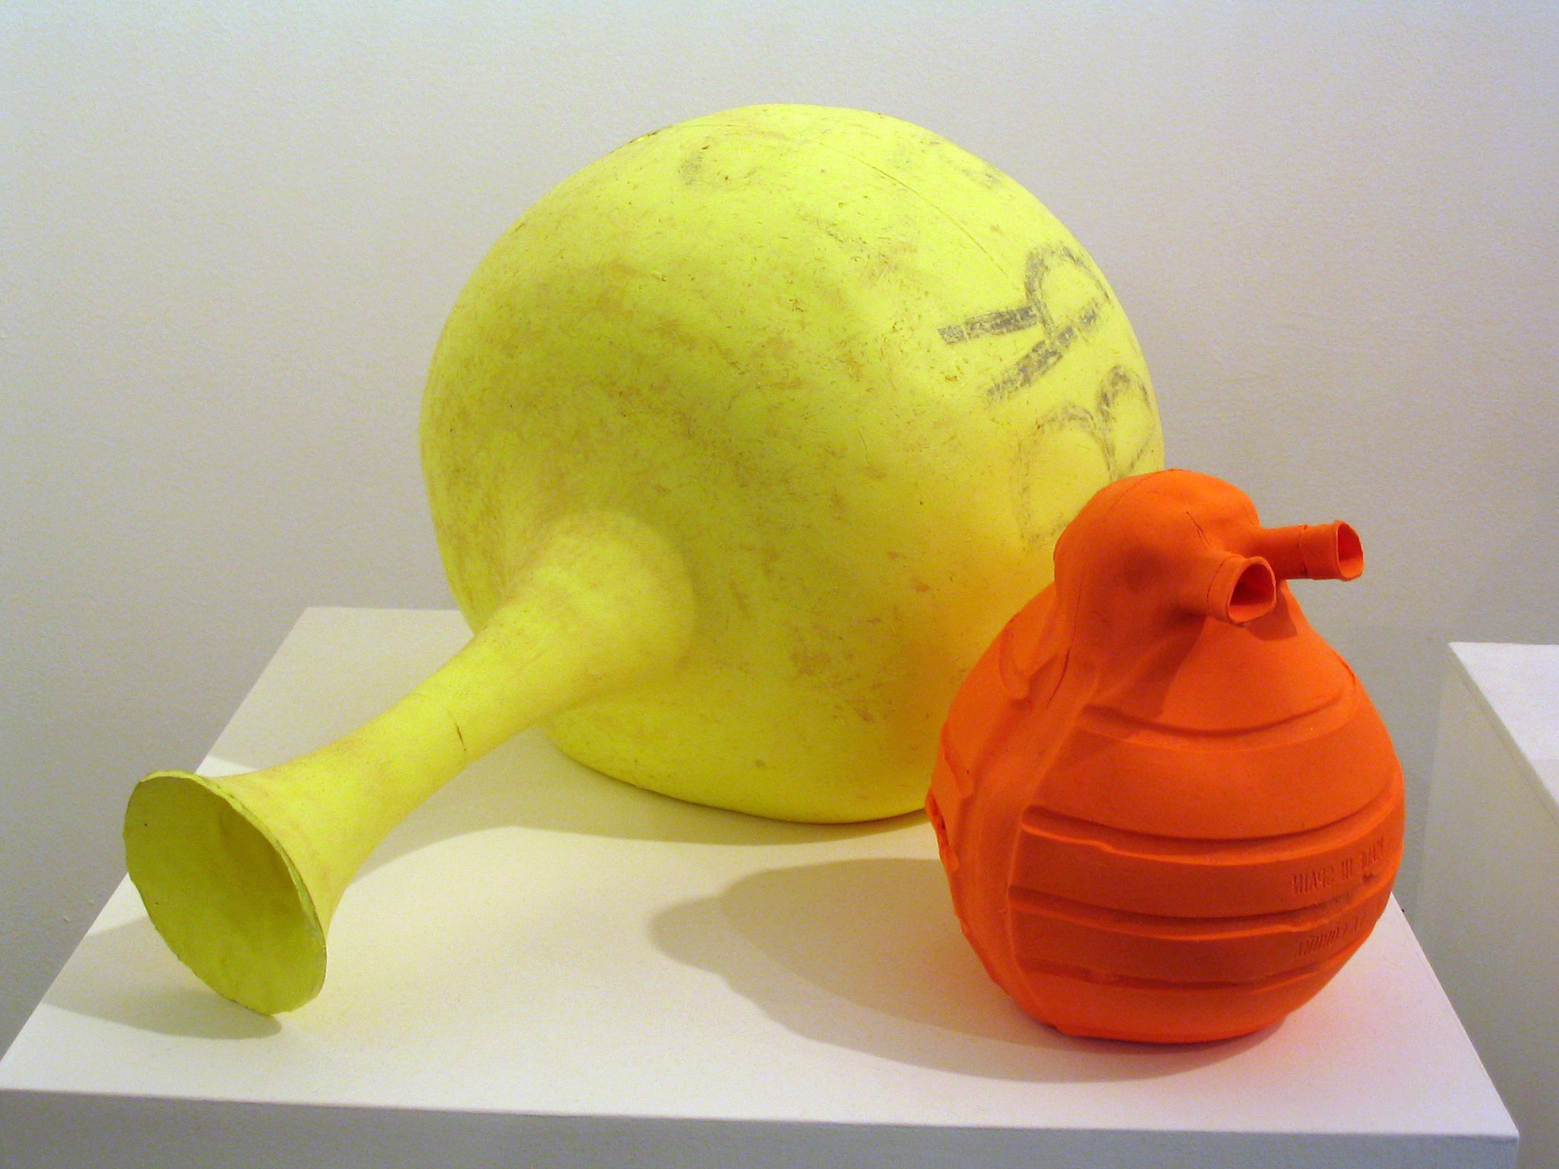 02 Inside-out Buoys II and VI, 2008, coloured latex, plinth top 55 x 55 cm